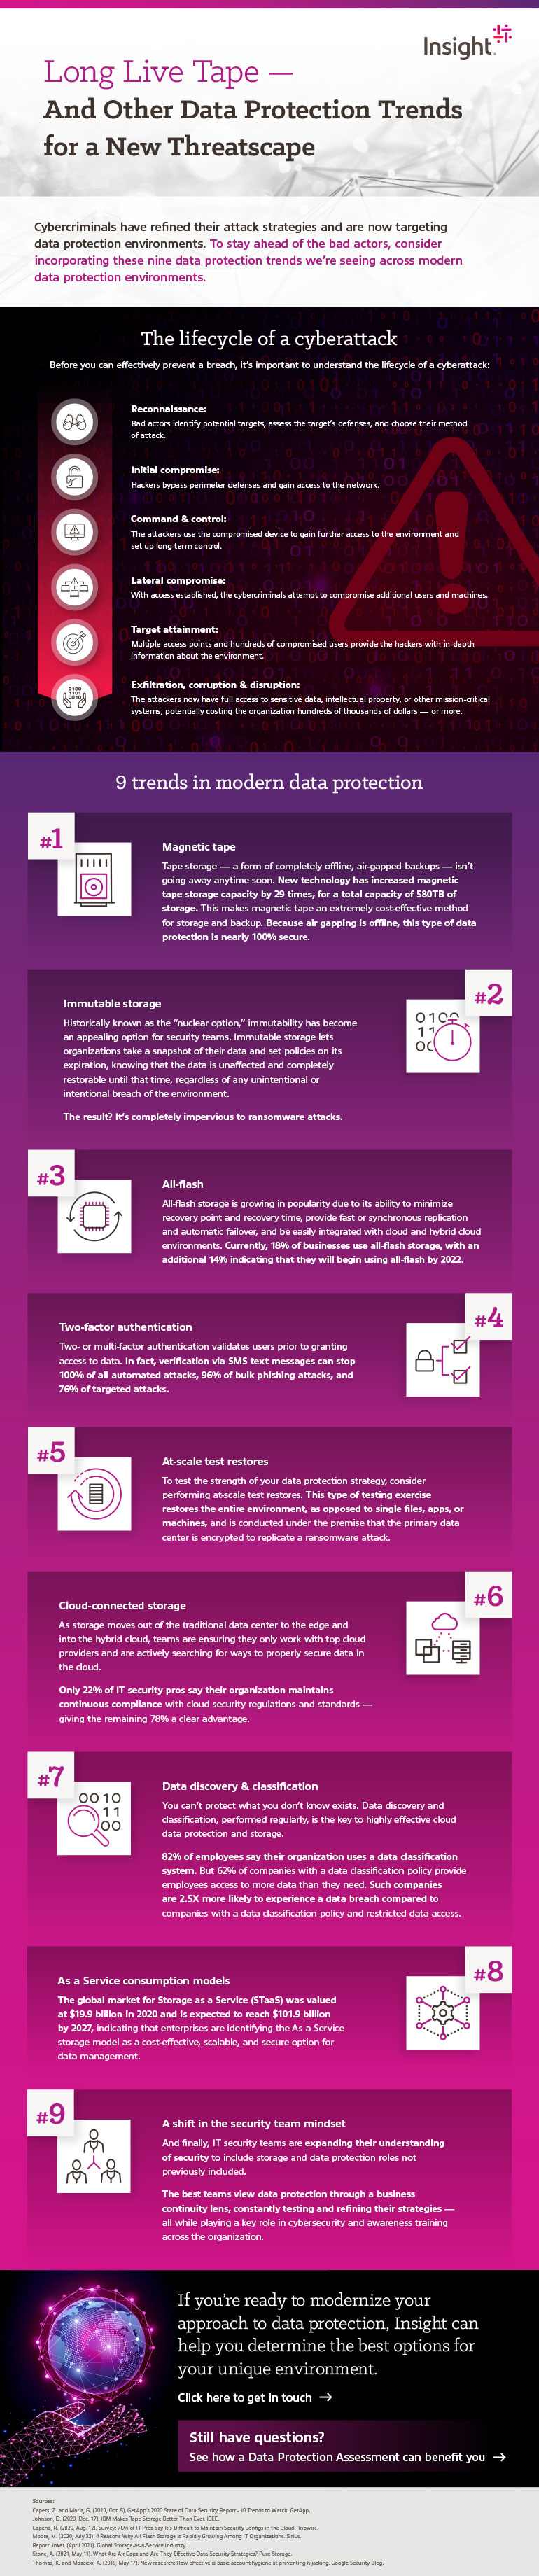 Long Live Tape — And Other Data Protection Trends for a New Threatscape infographic transcribed below